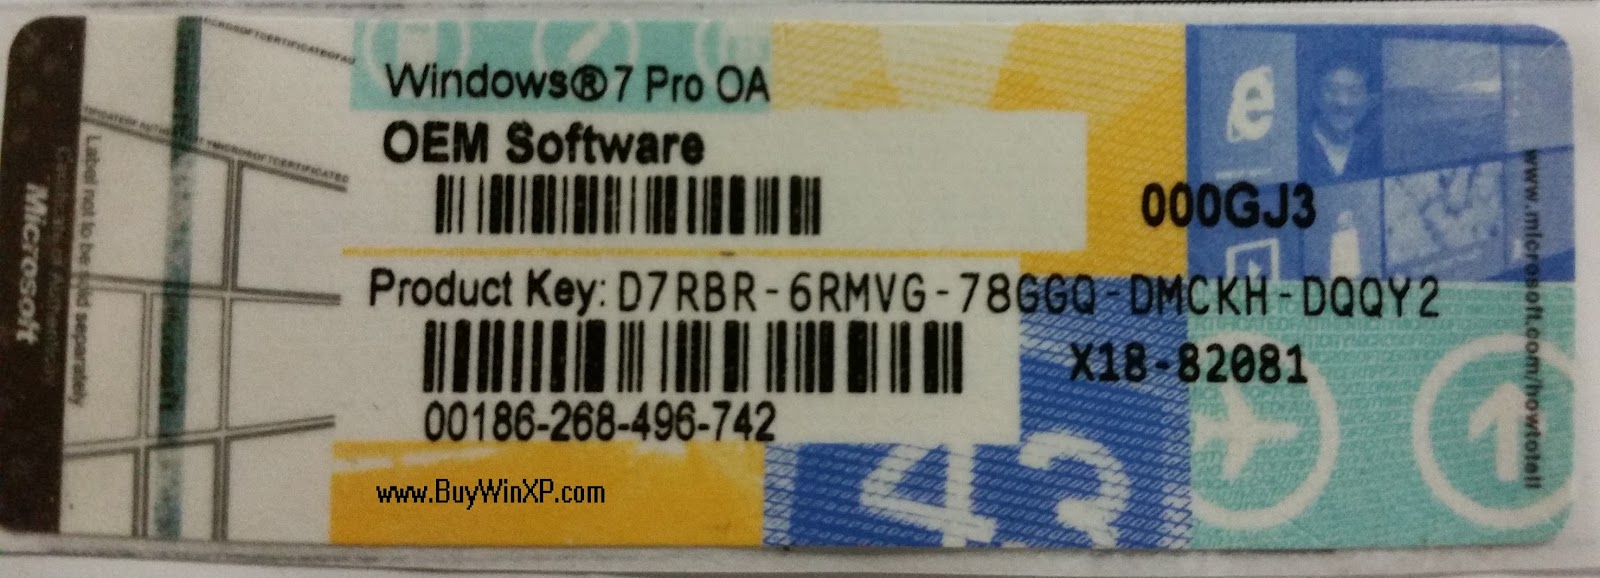 Serial Key For Windows 7 Professional Sp1